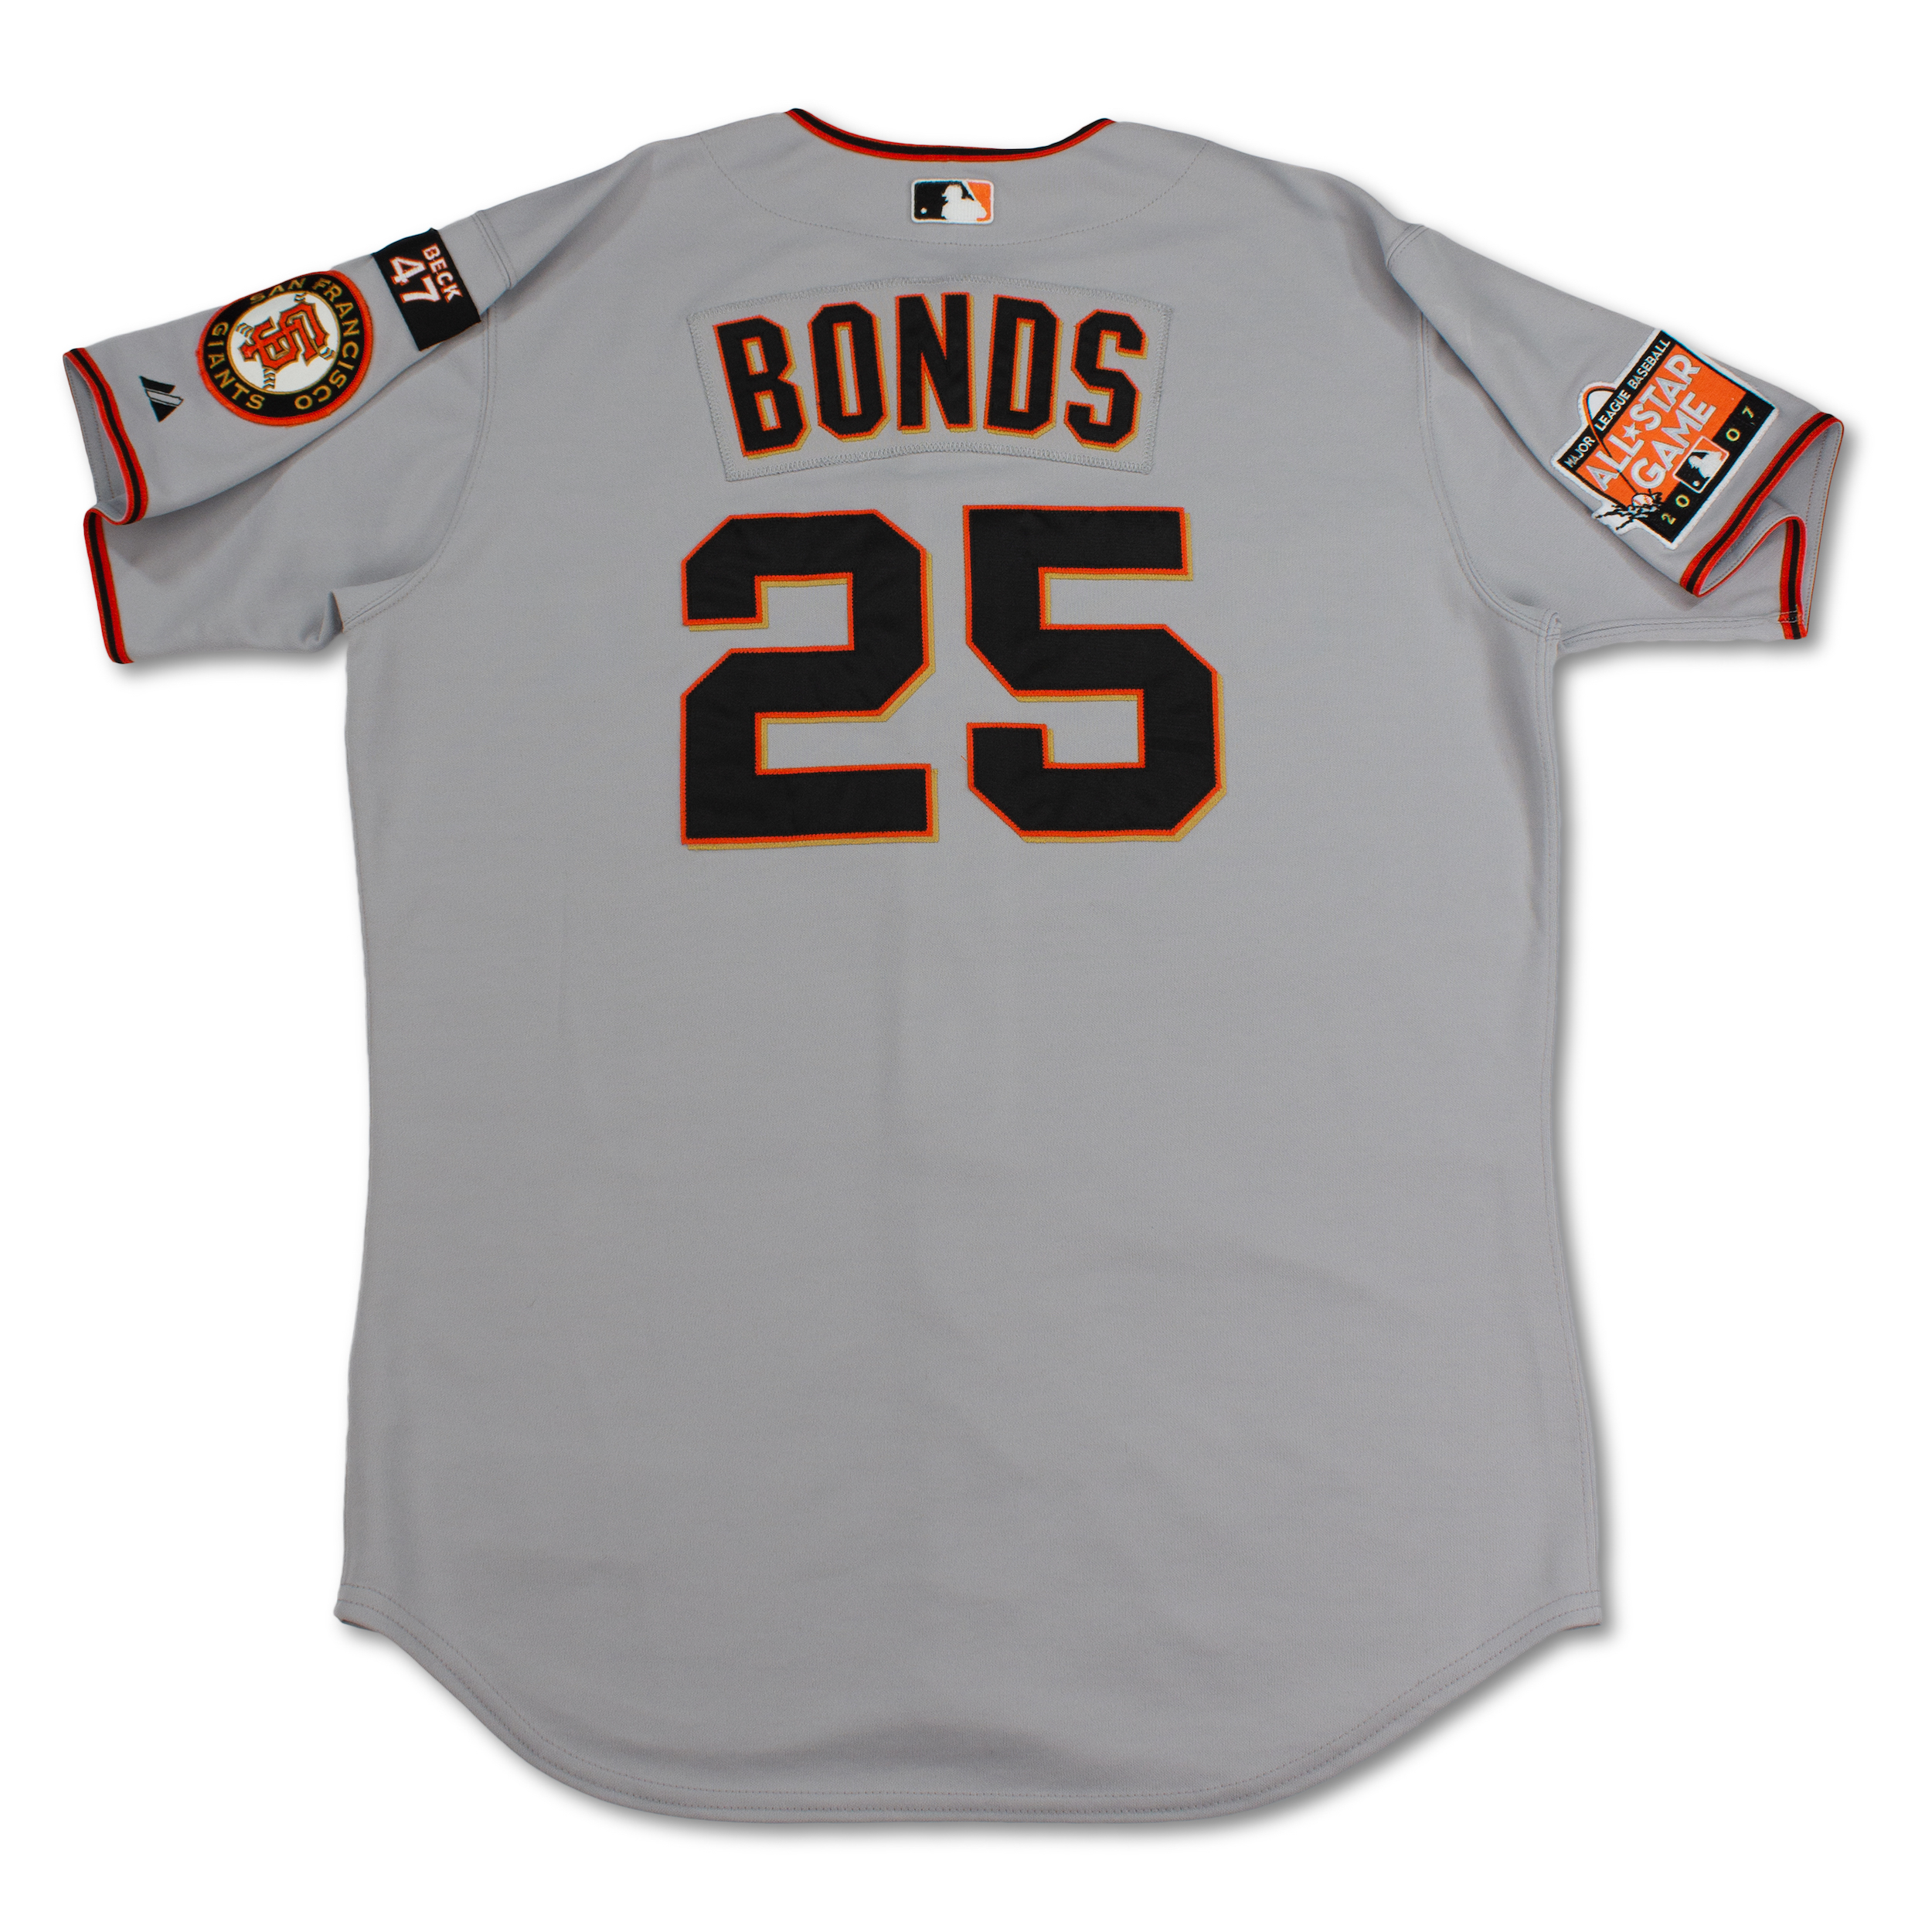 San Francisco Giants All-Star Game MLB Jerseys for sale